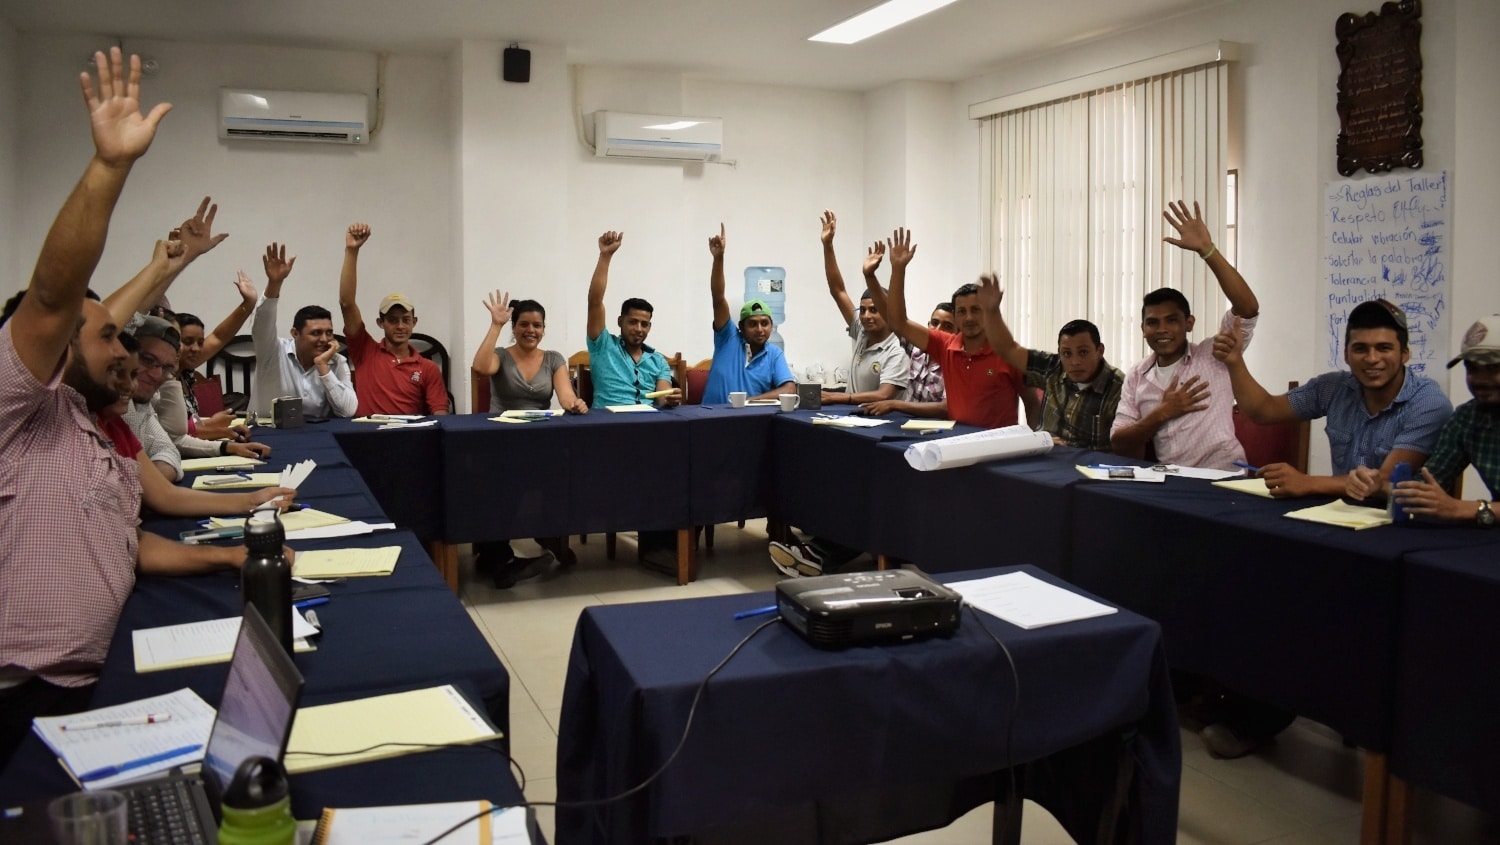 At the end of the workshop, we asked the participants from El Polo whether now they saw entrepreneurship in themselves. Everyone raised their hand "yes!"